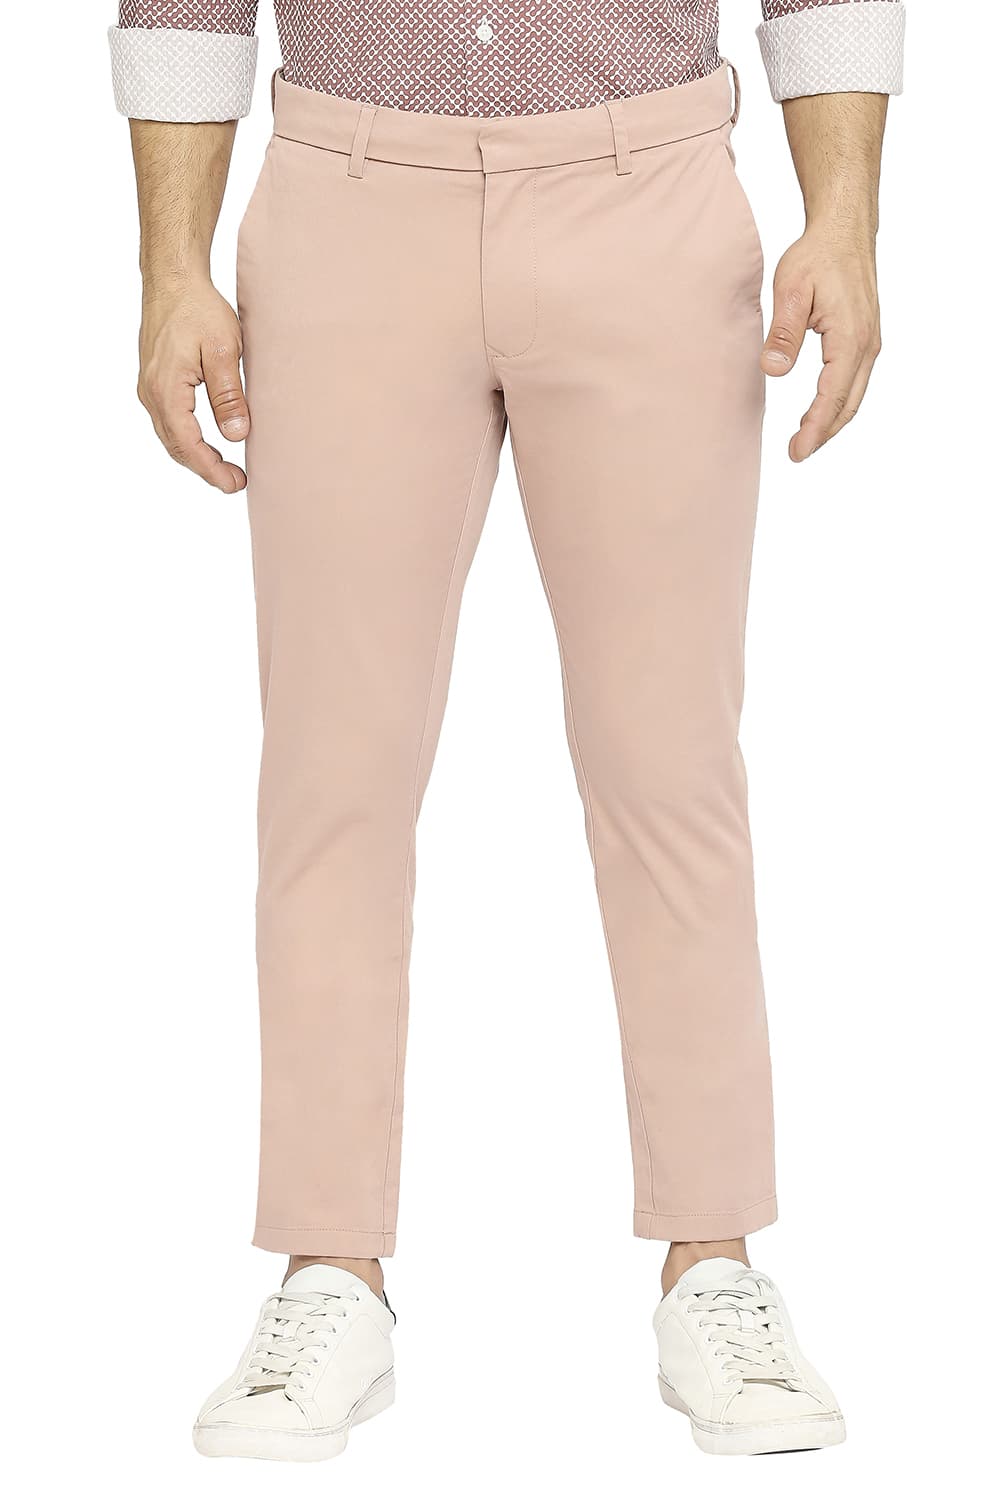 BASICS TAPERED FIT COTTON STRETCH PEACH TWILL TROUSERS